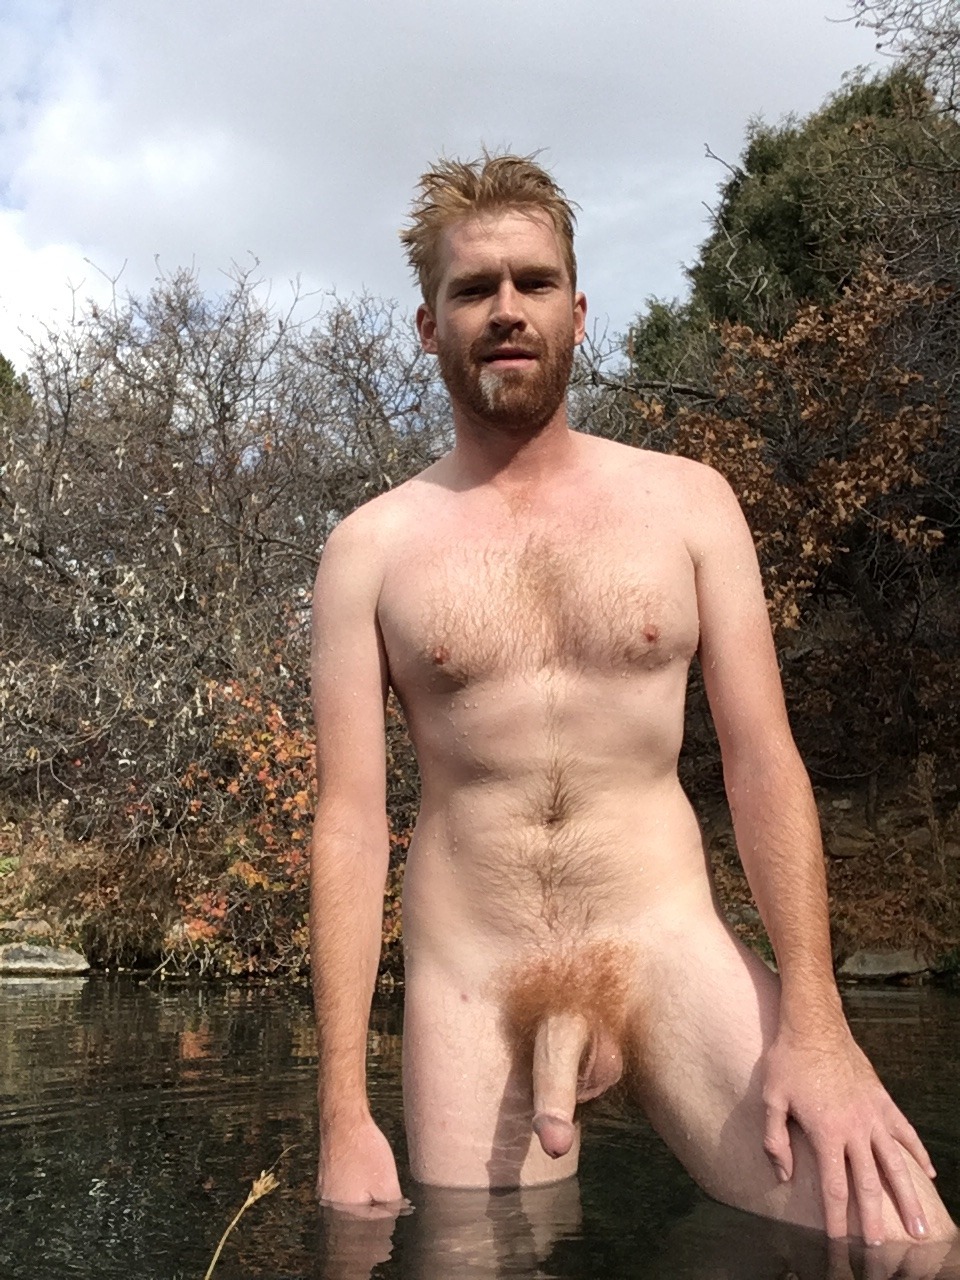 ecosexualman:
â€œIn hot water // Iâ€™ve resisted posting pictures that show my face (and other parts) together like this. But, I think, since my mission here is to promote a culture that is body positive and earth positive, dedicated to the freedom to be...